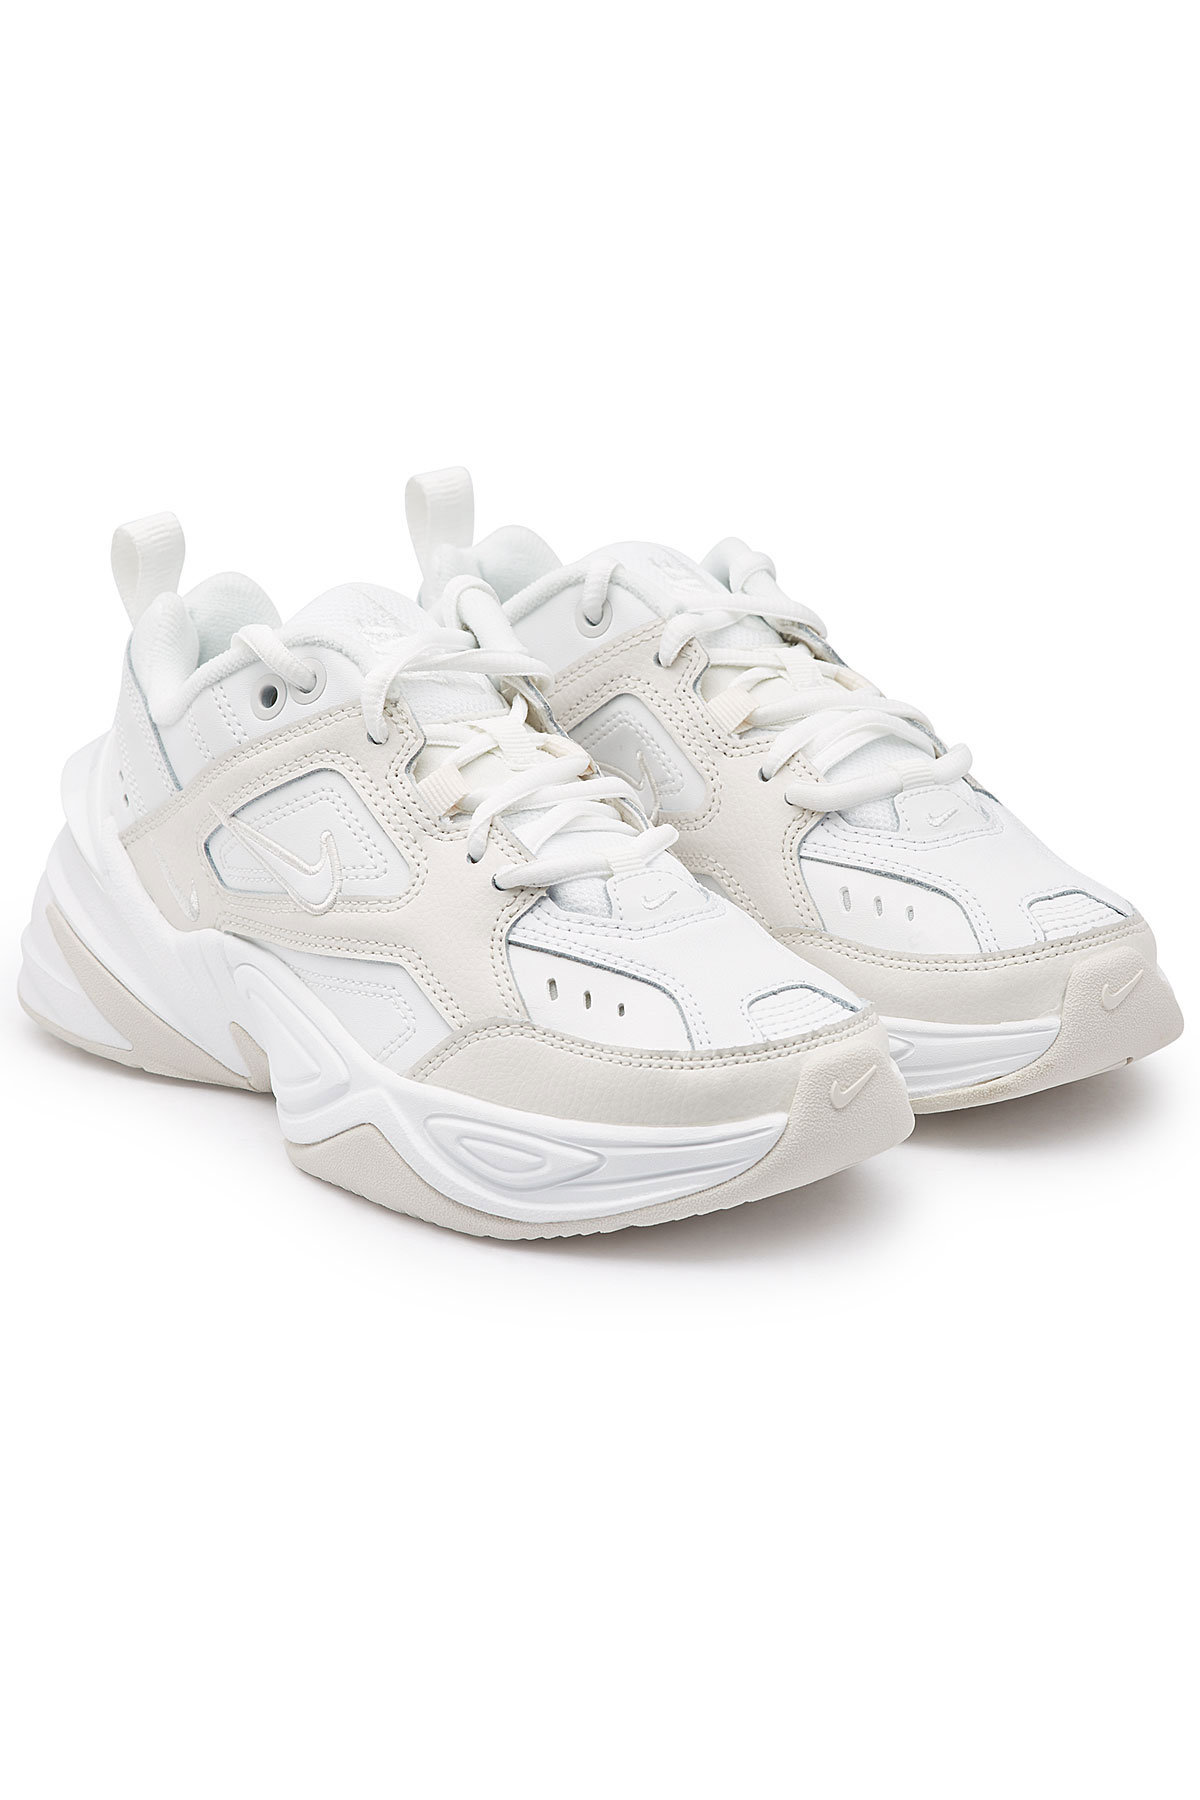 m2k tekno leather sneakers